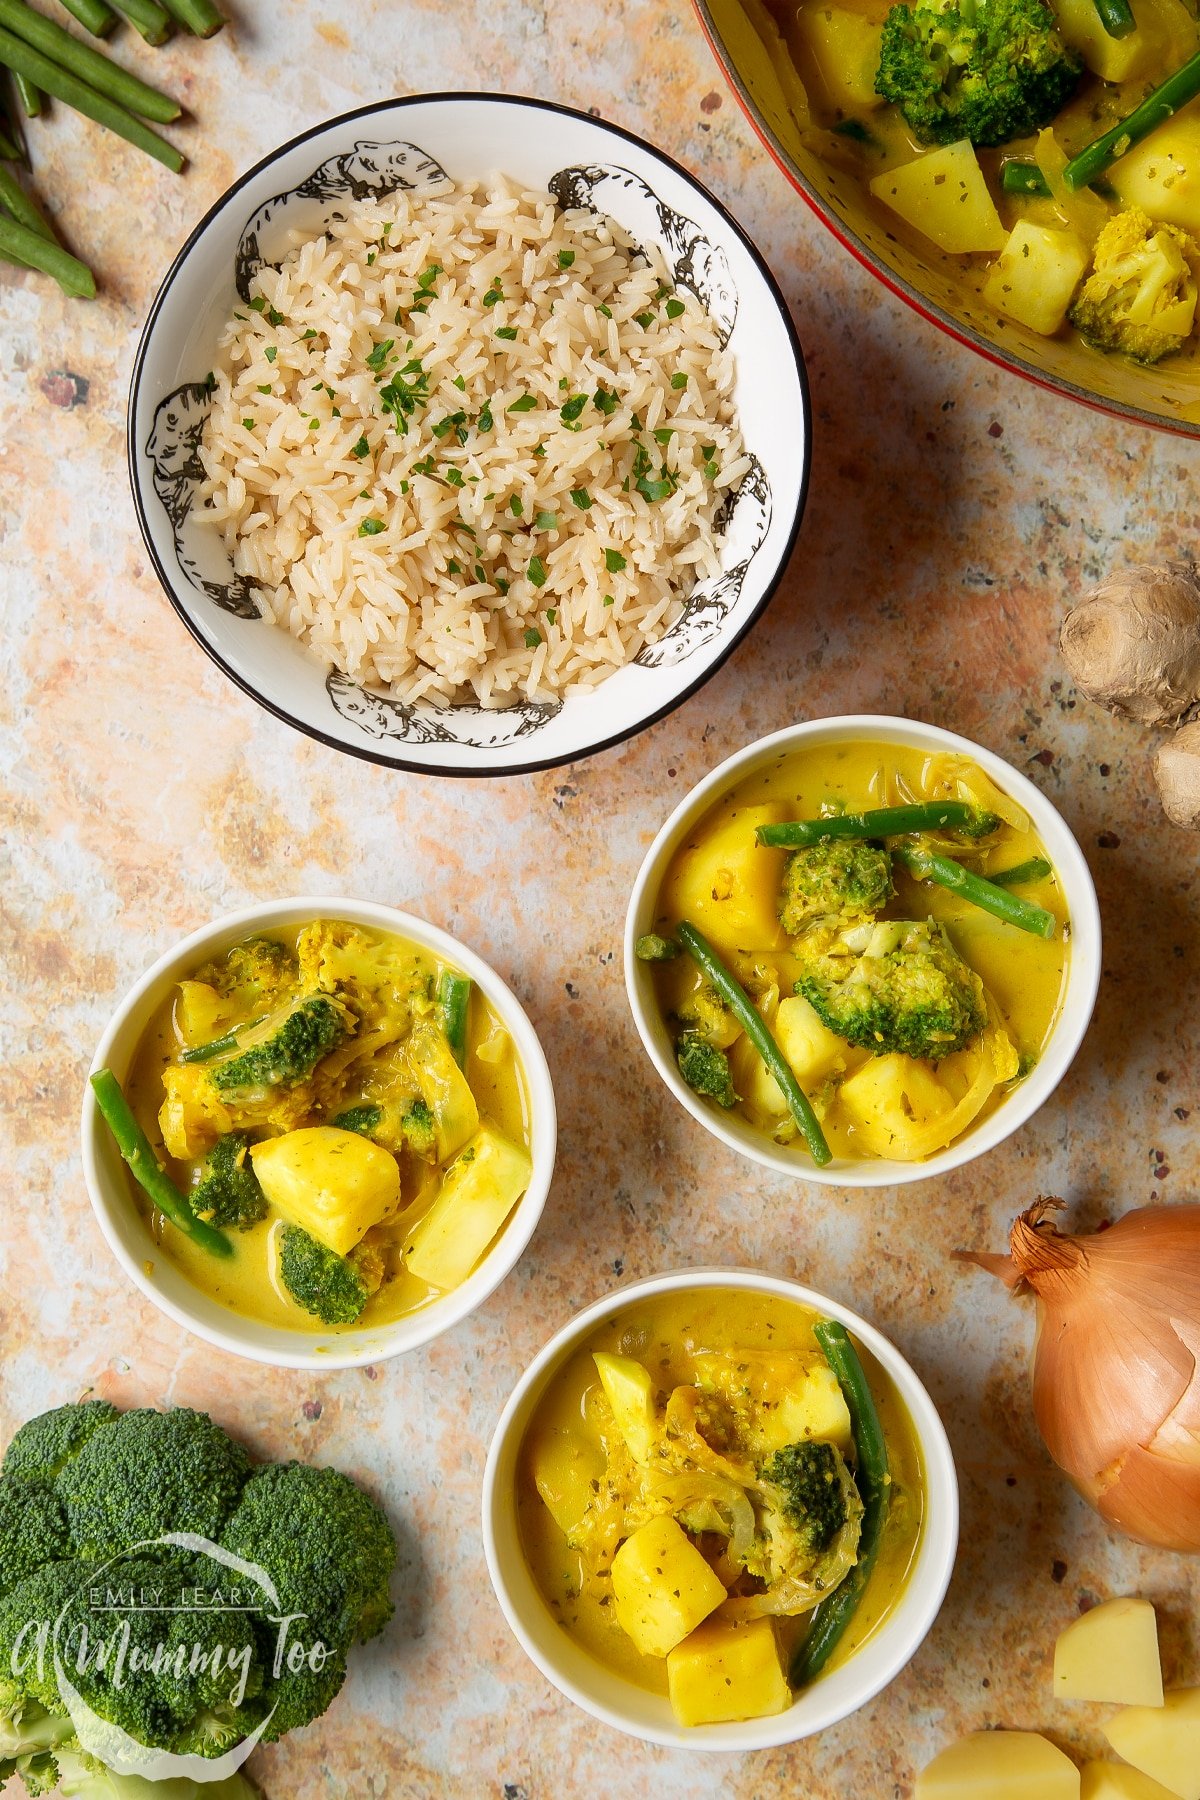 Vegetarian yellow curry with broccoli, potato and green beans, served to small white bowls. A bowl of rice is also shown alongside some ingredients. 